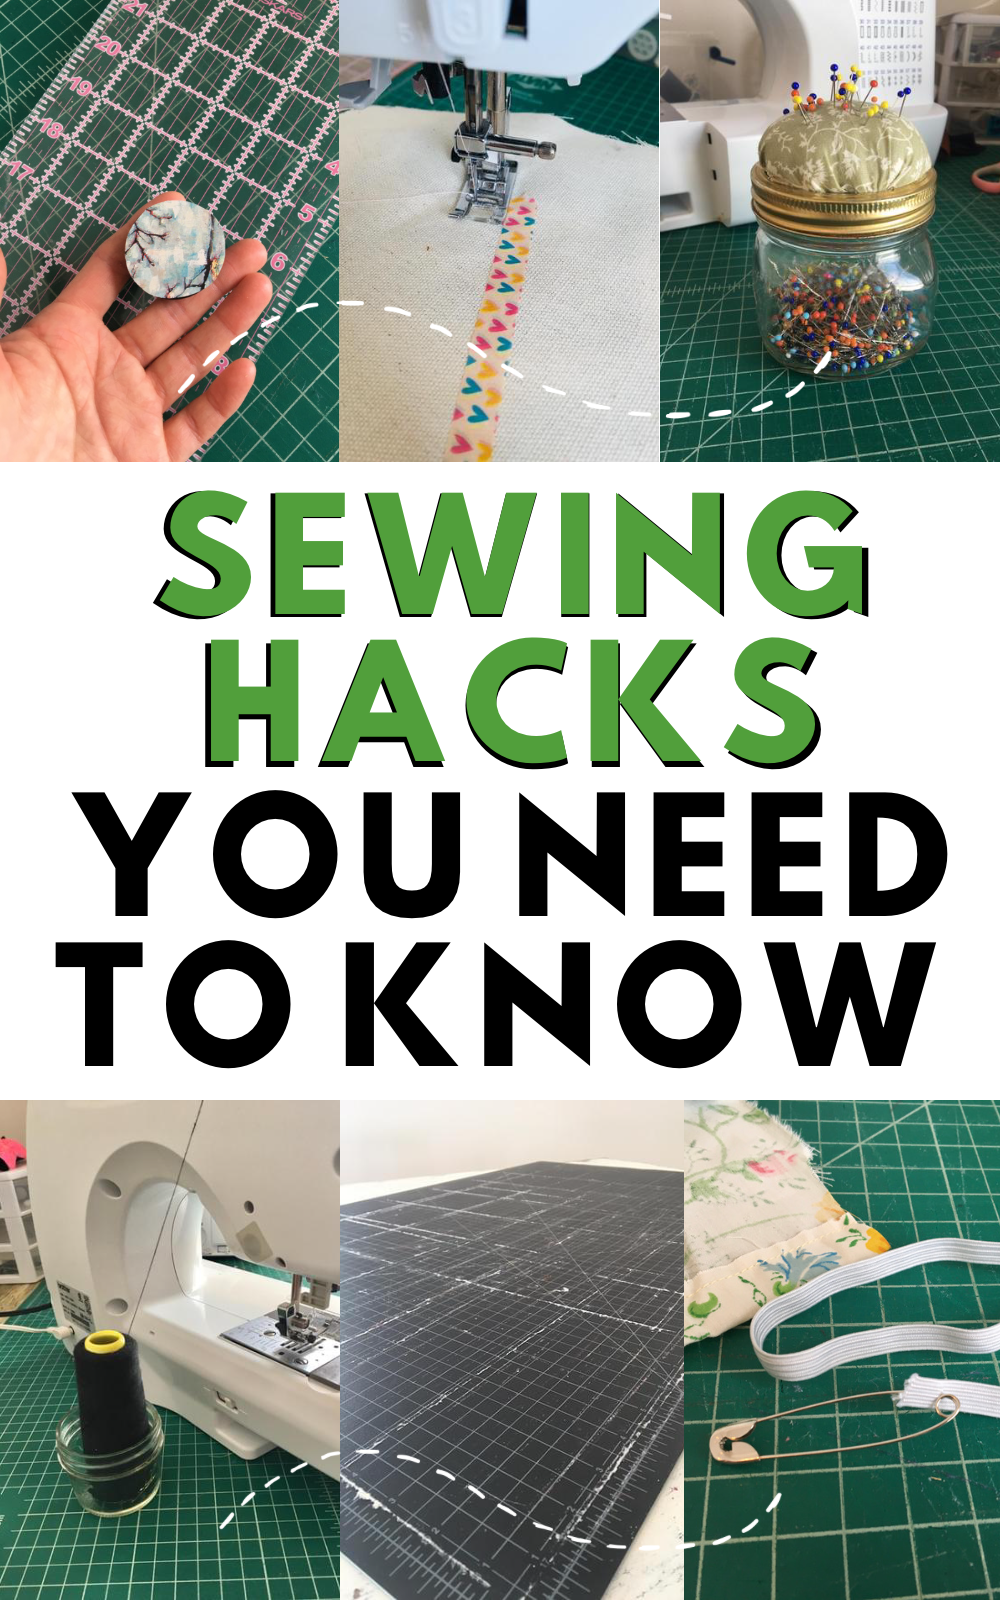 Sewing hacks: How to sew with the bobbin thread in the needle 